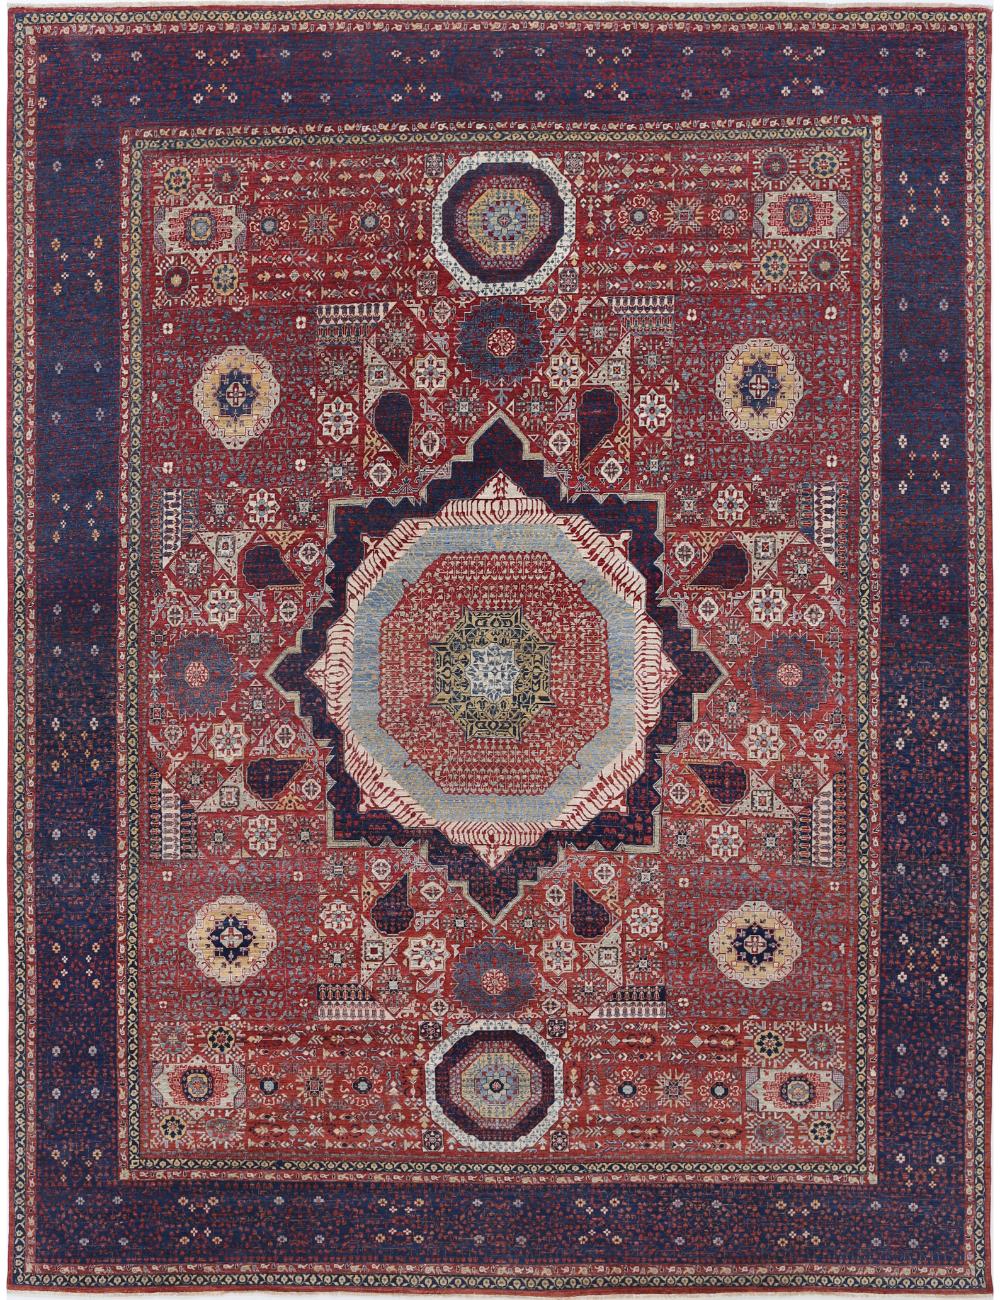 Mamluk 11' 8" X 14' 11" Hand-Knotted Wool Rug 11' 8" X 14' 11" (356 X 455) / Red / Blue